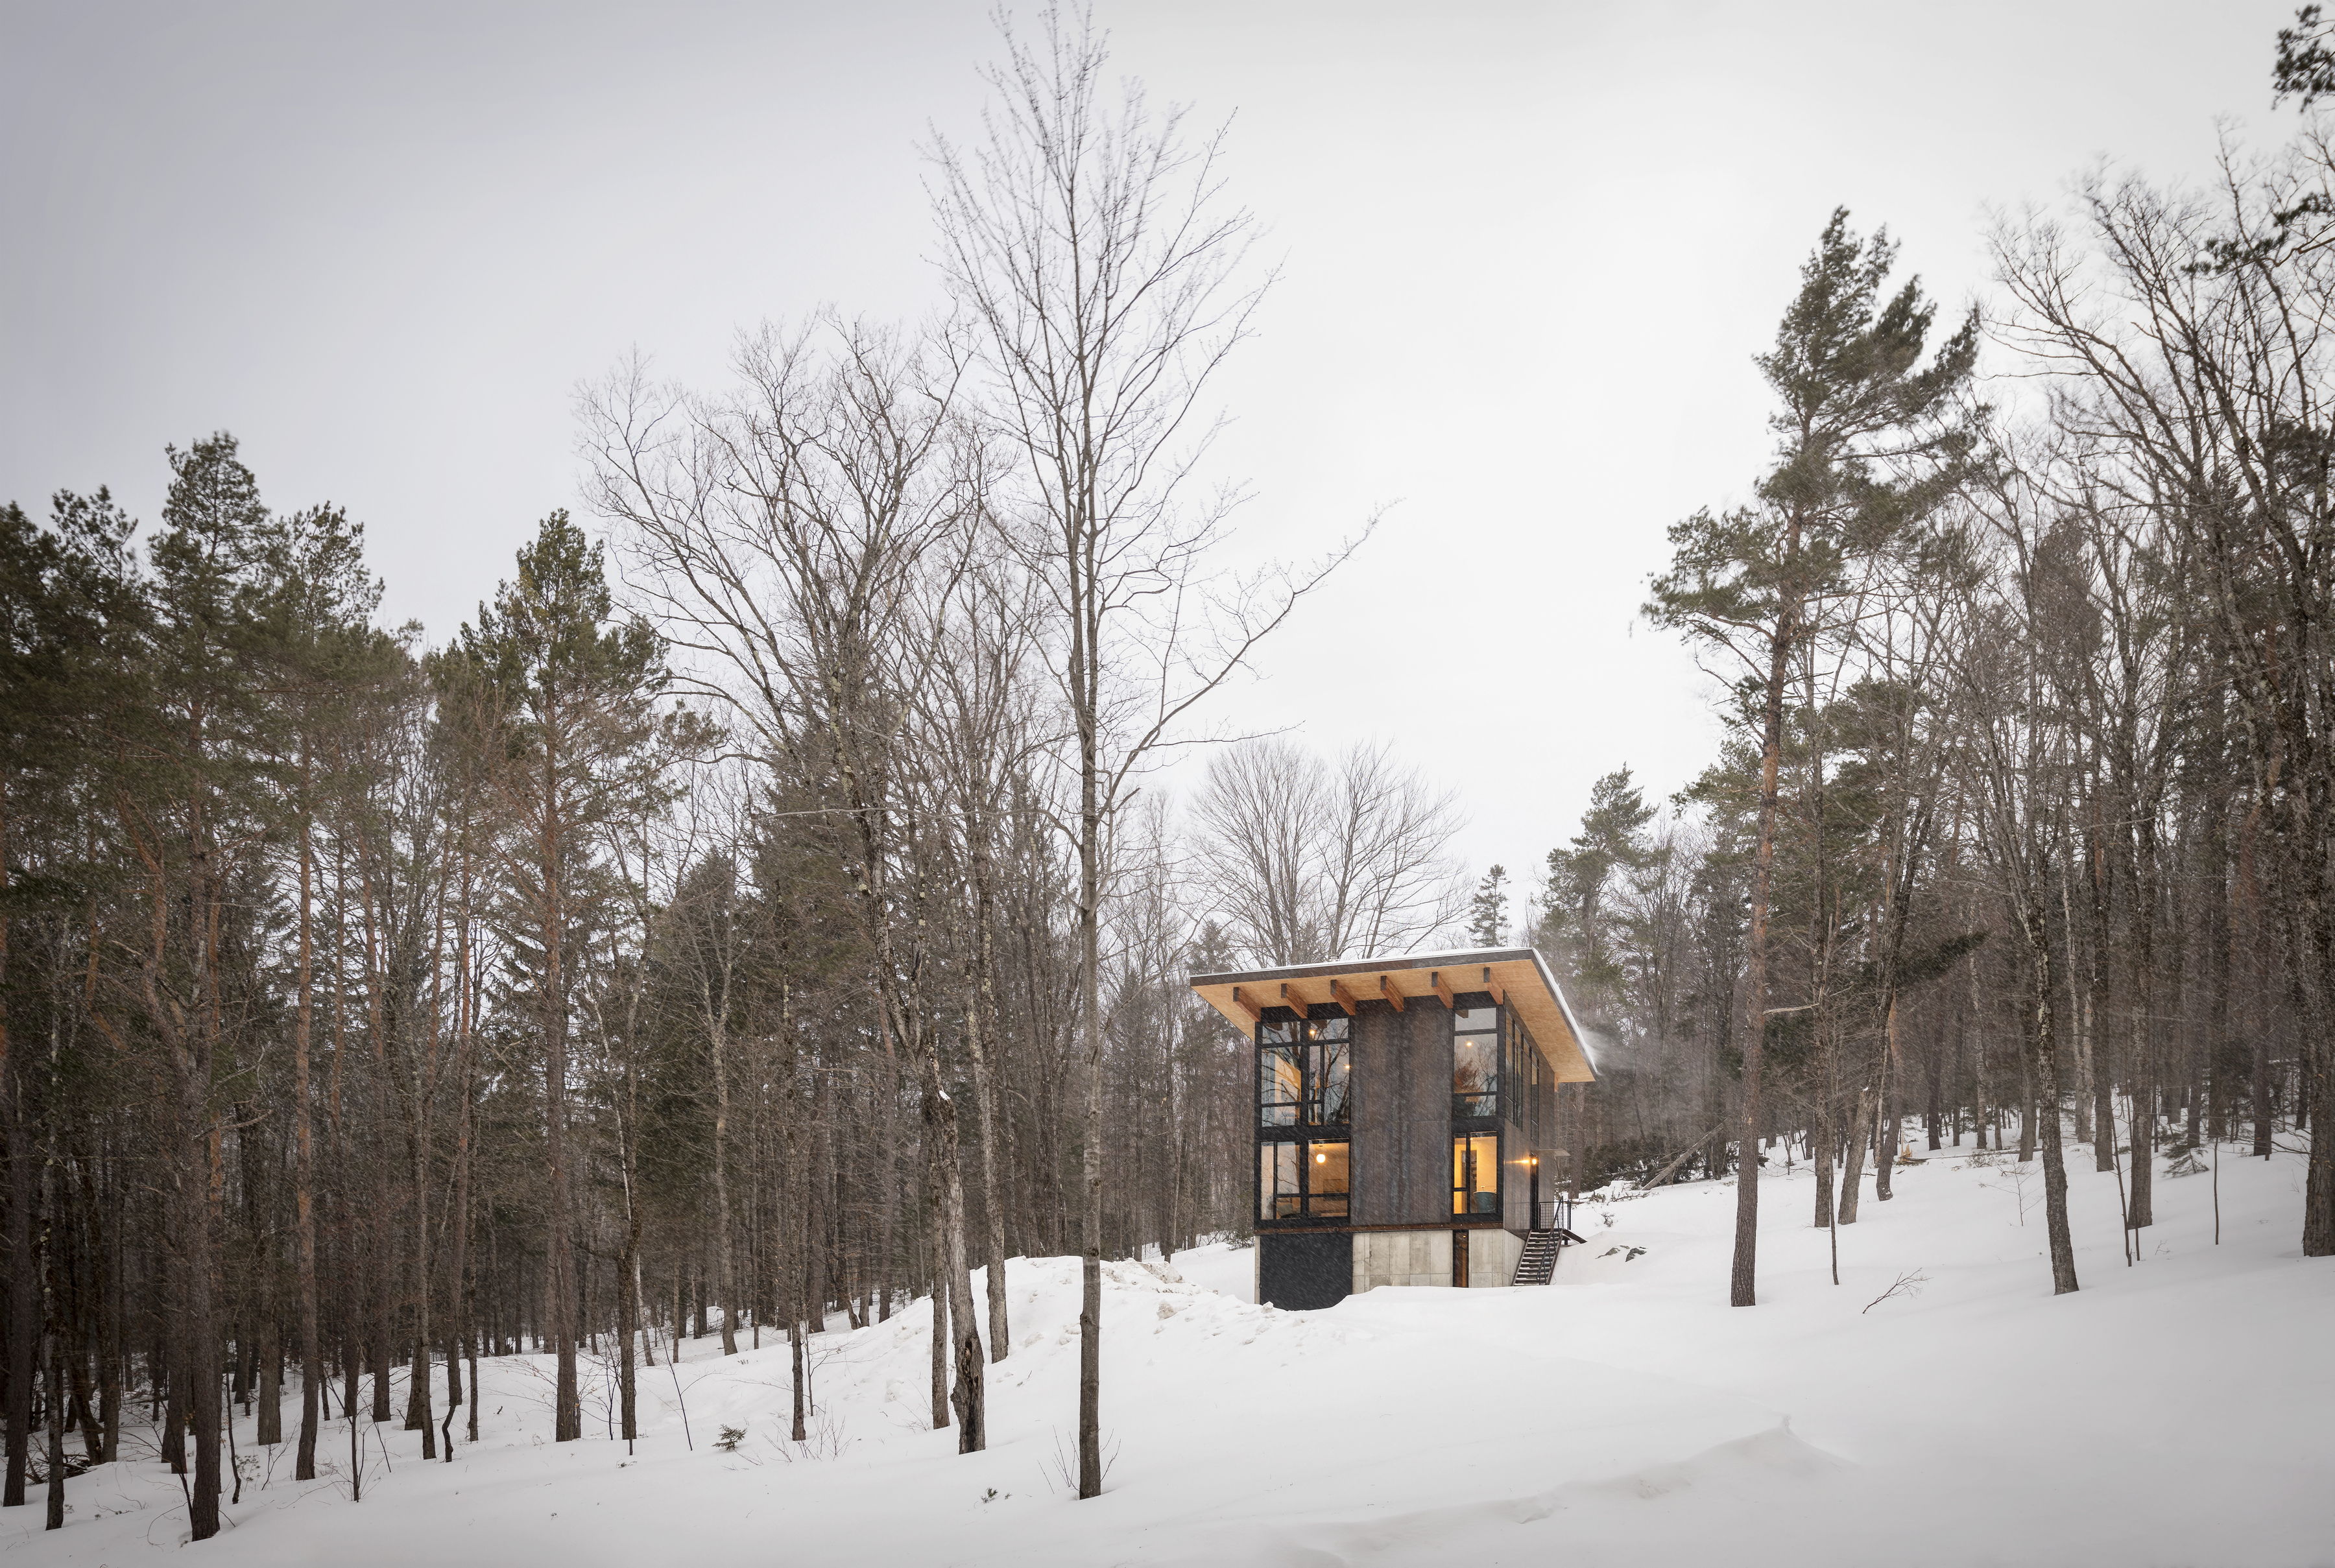 Vermont Cabin - Photography by Aaron Leitz